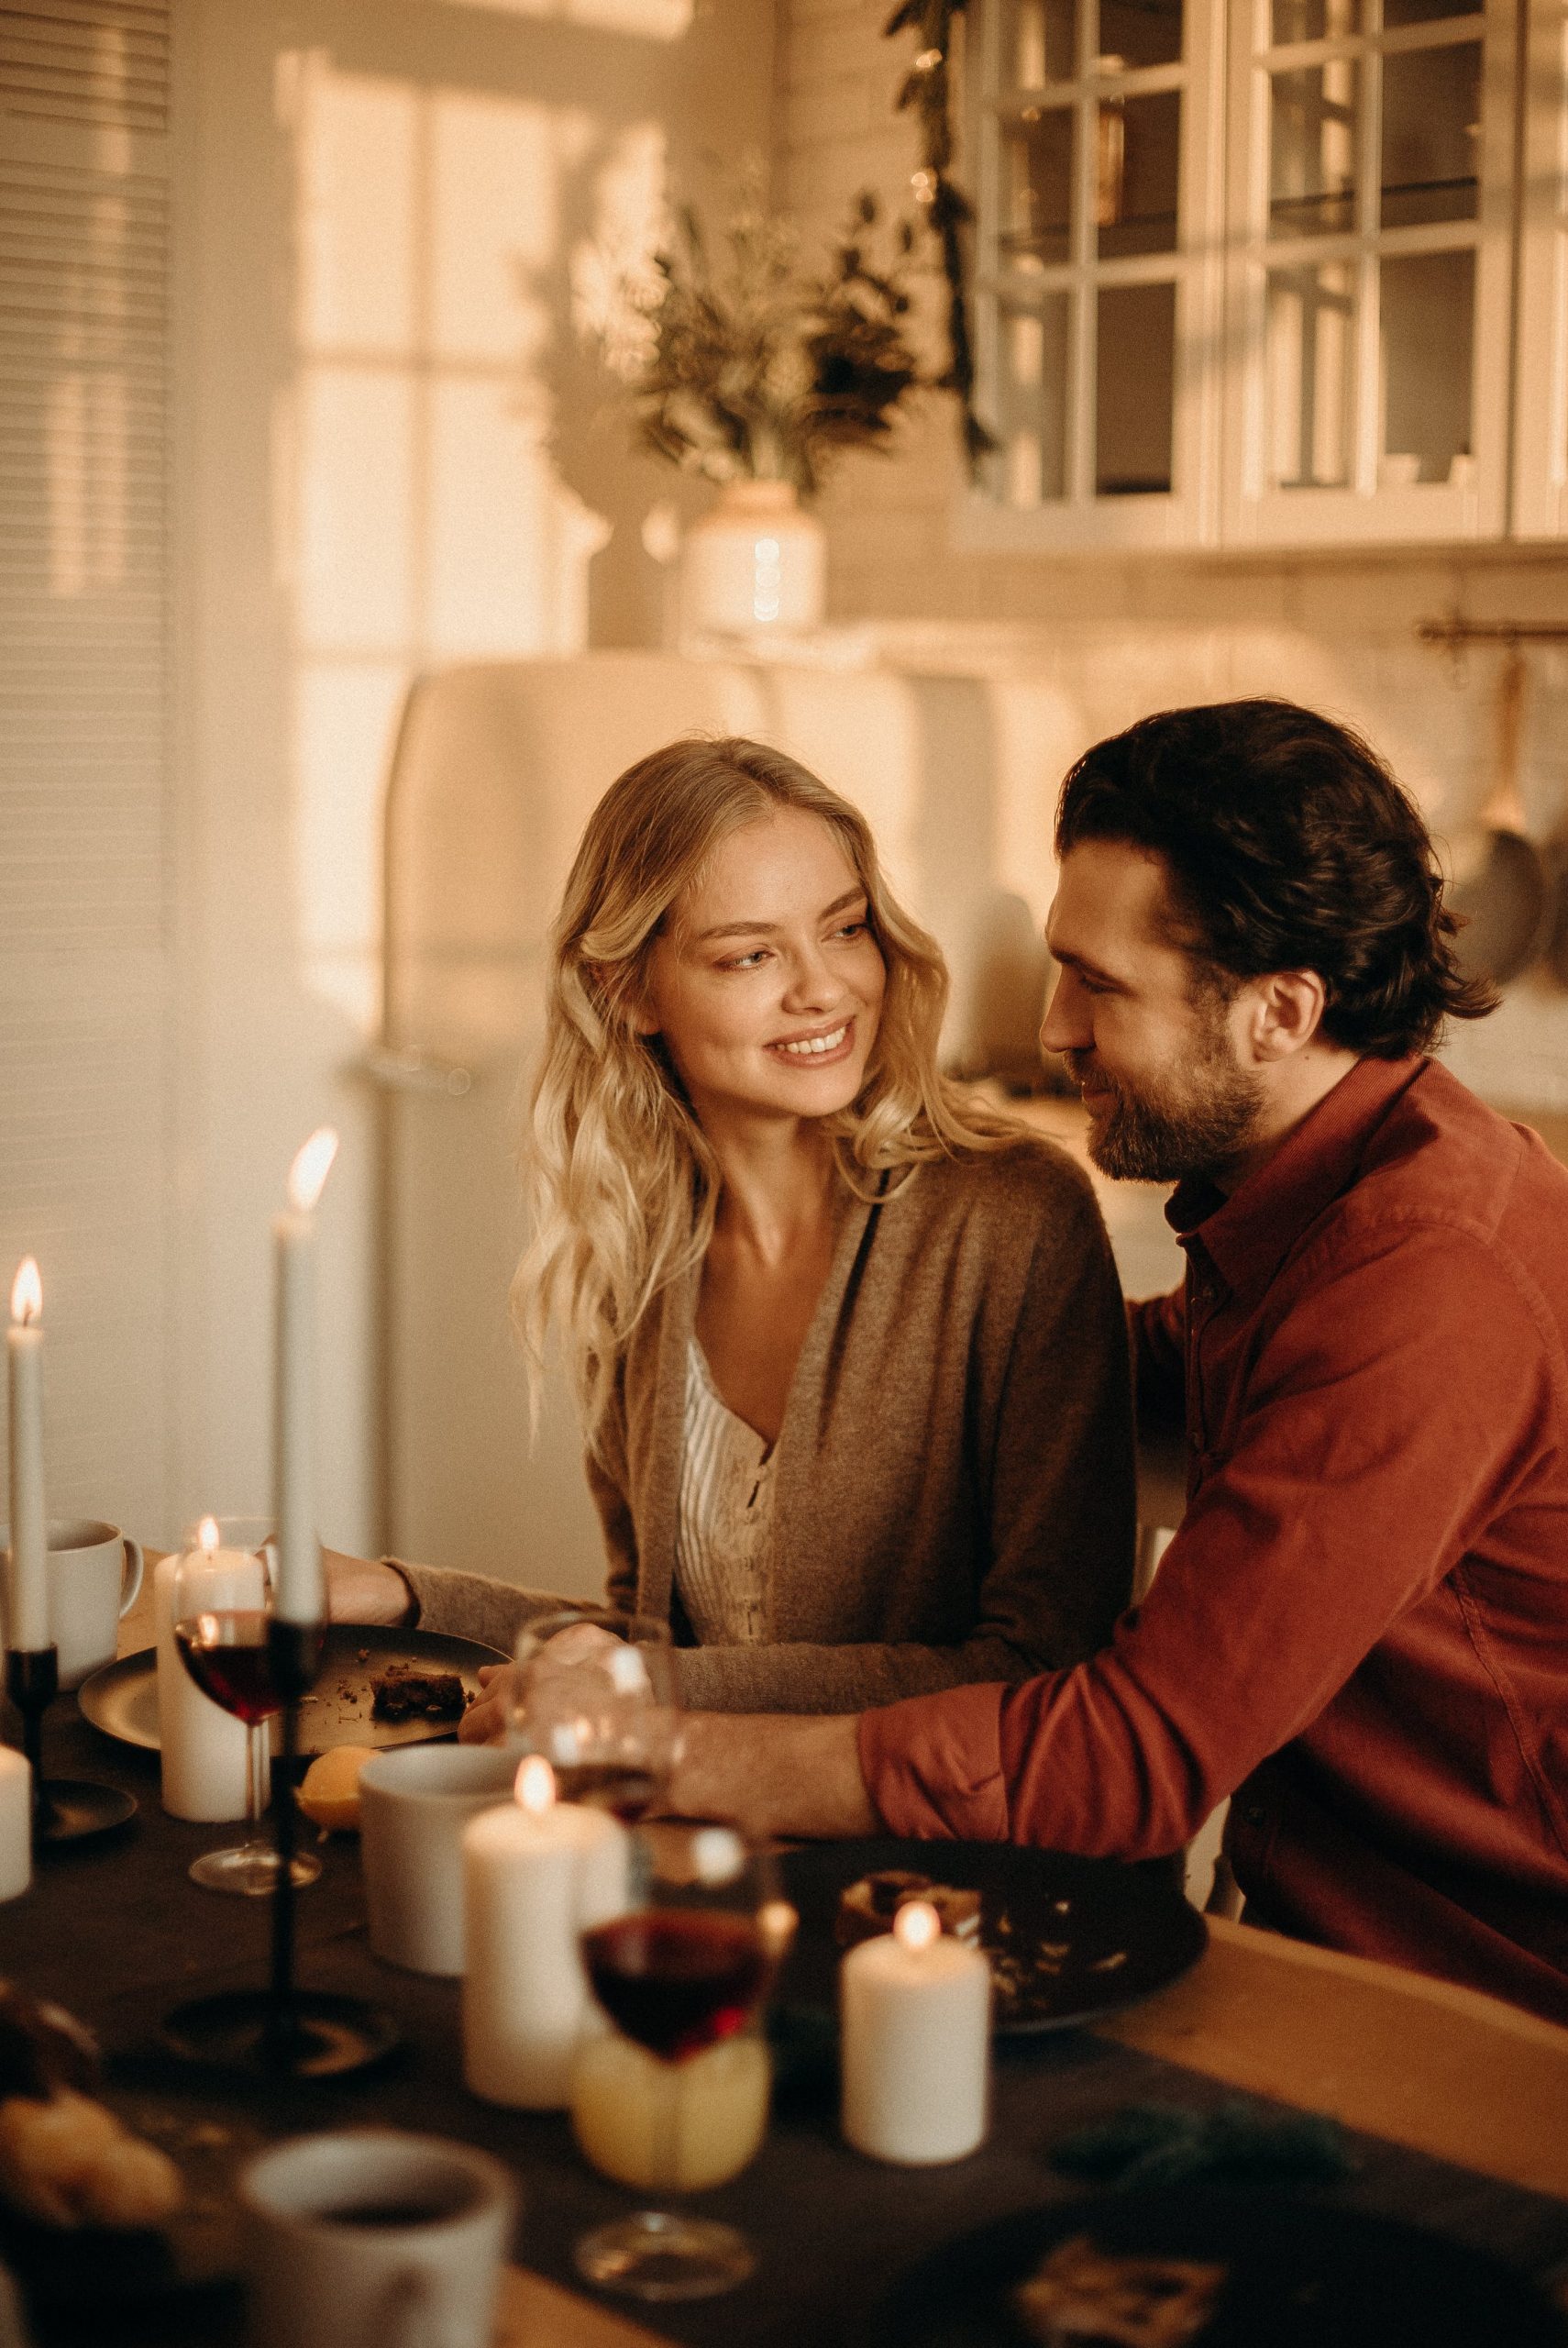 A cozy candlelit dinner with a smiling couple gazing at each other over wine glasses.